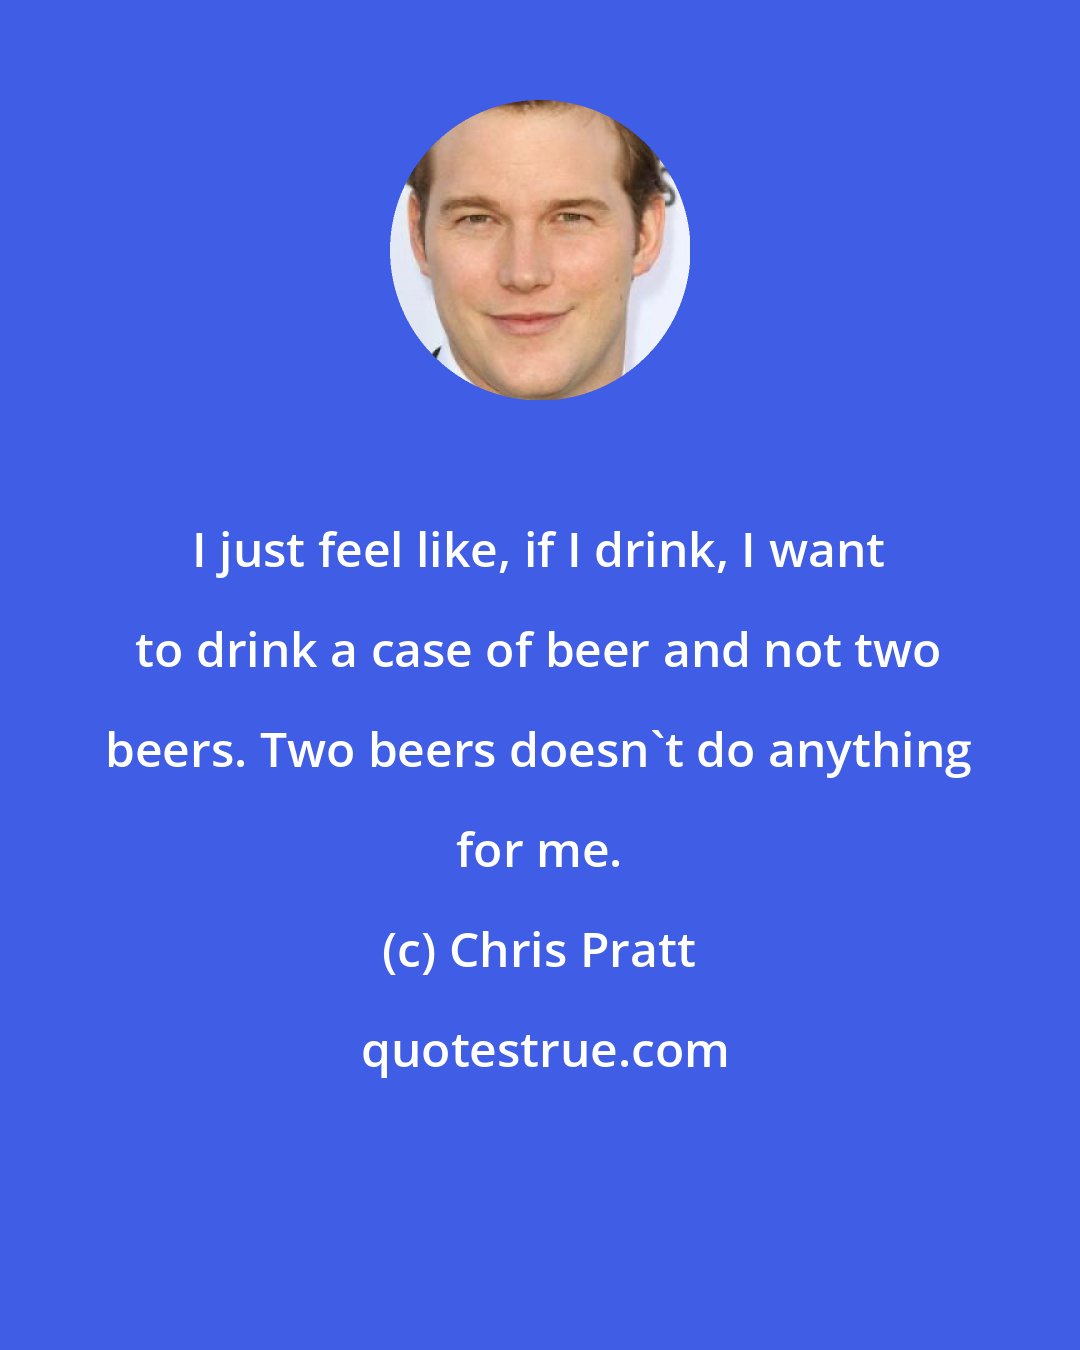 Chris Pratt: I just feel like, if I drink, I want to drink a case of beer and not two beers. Two beers doesn't do anything for me.